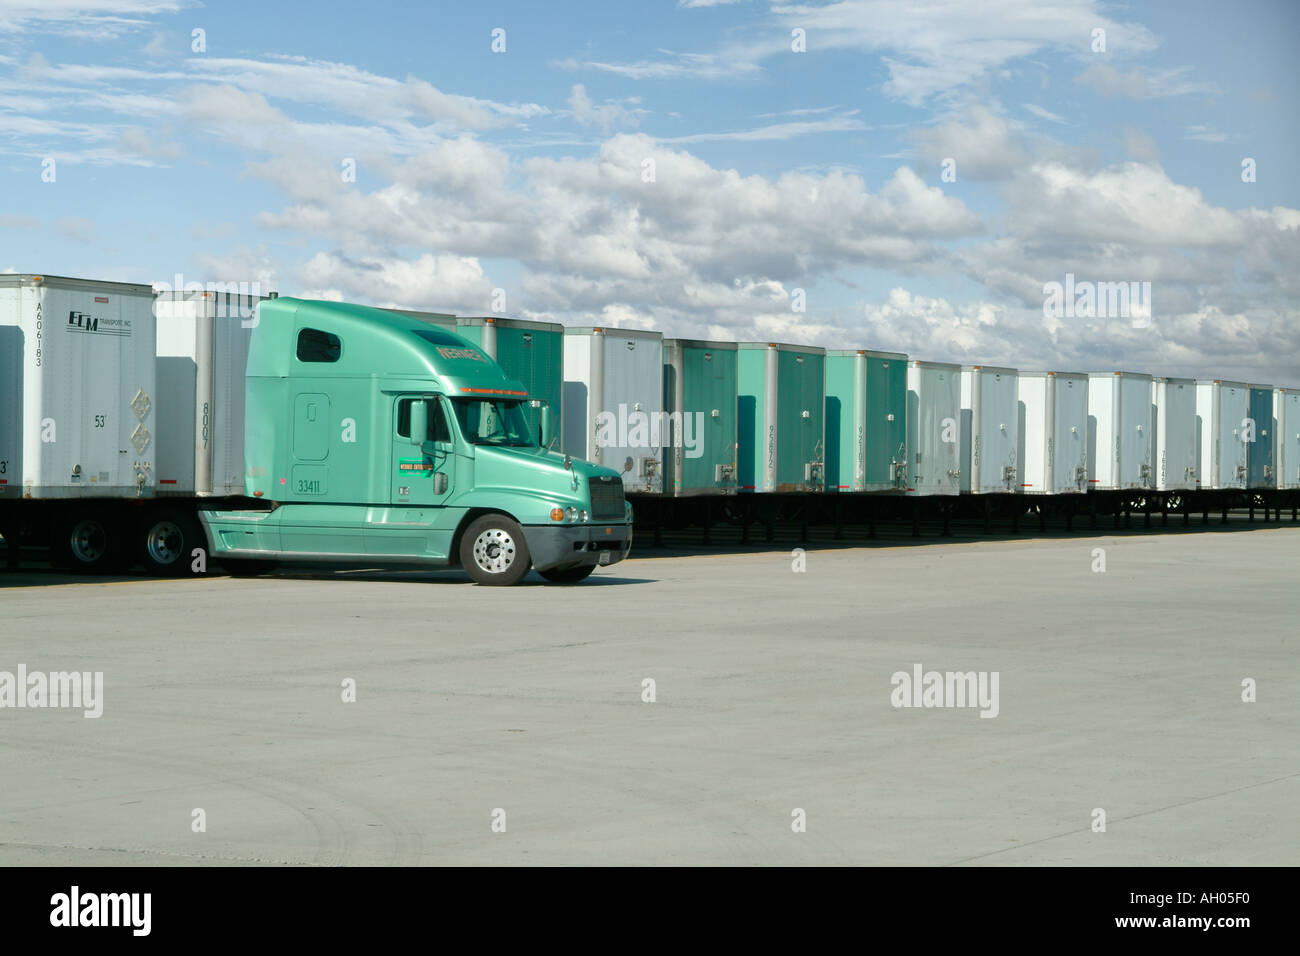 Truck With Many Trailers In Distribution Center Yard, Pennsylvania, USA Stock Photo